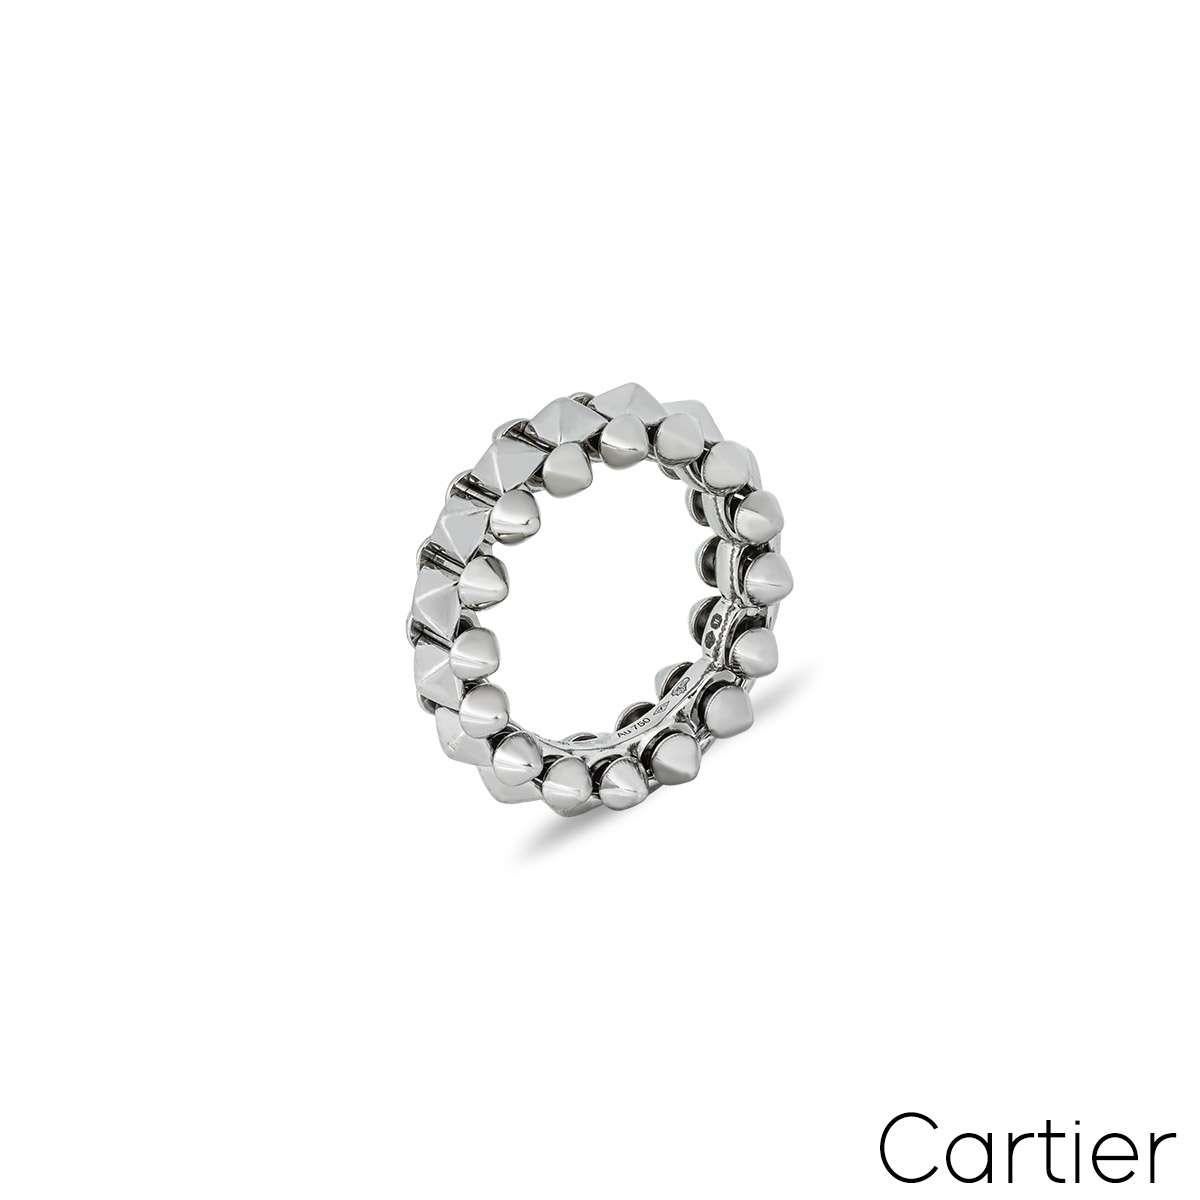 An 18k white gold ring from Cartier's Clash de Cartier collection. The rings design is composed of a studded style centre band which is complemented by smaller studs all the way round. Weighing 11.1 grams, the ring is a UK size K½/ US size 5 1/4/ EU